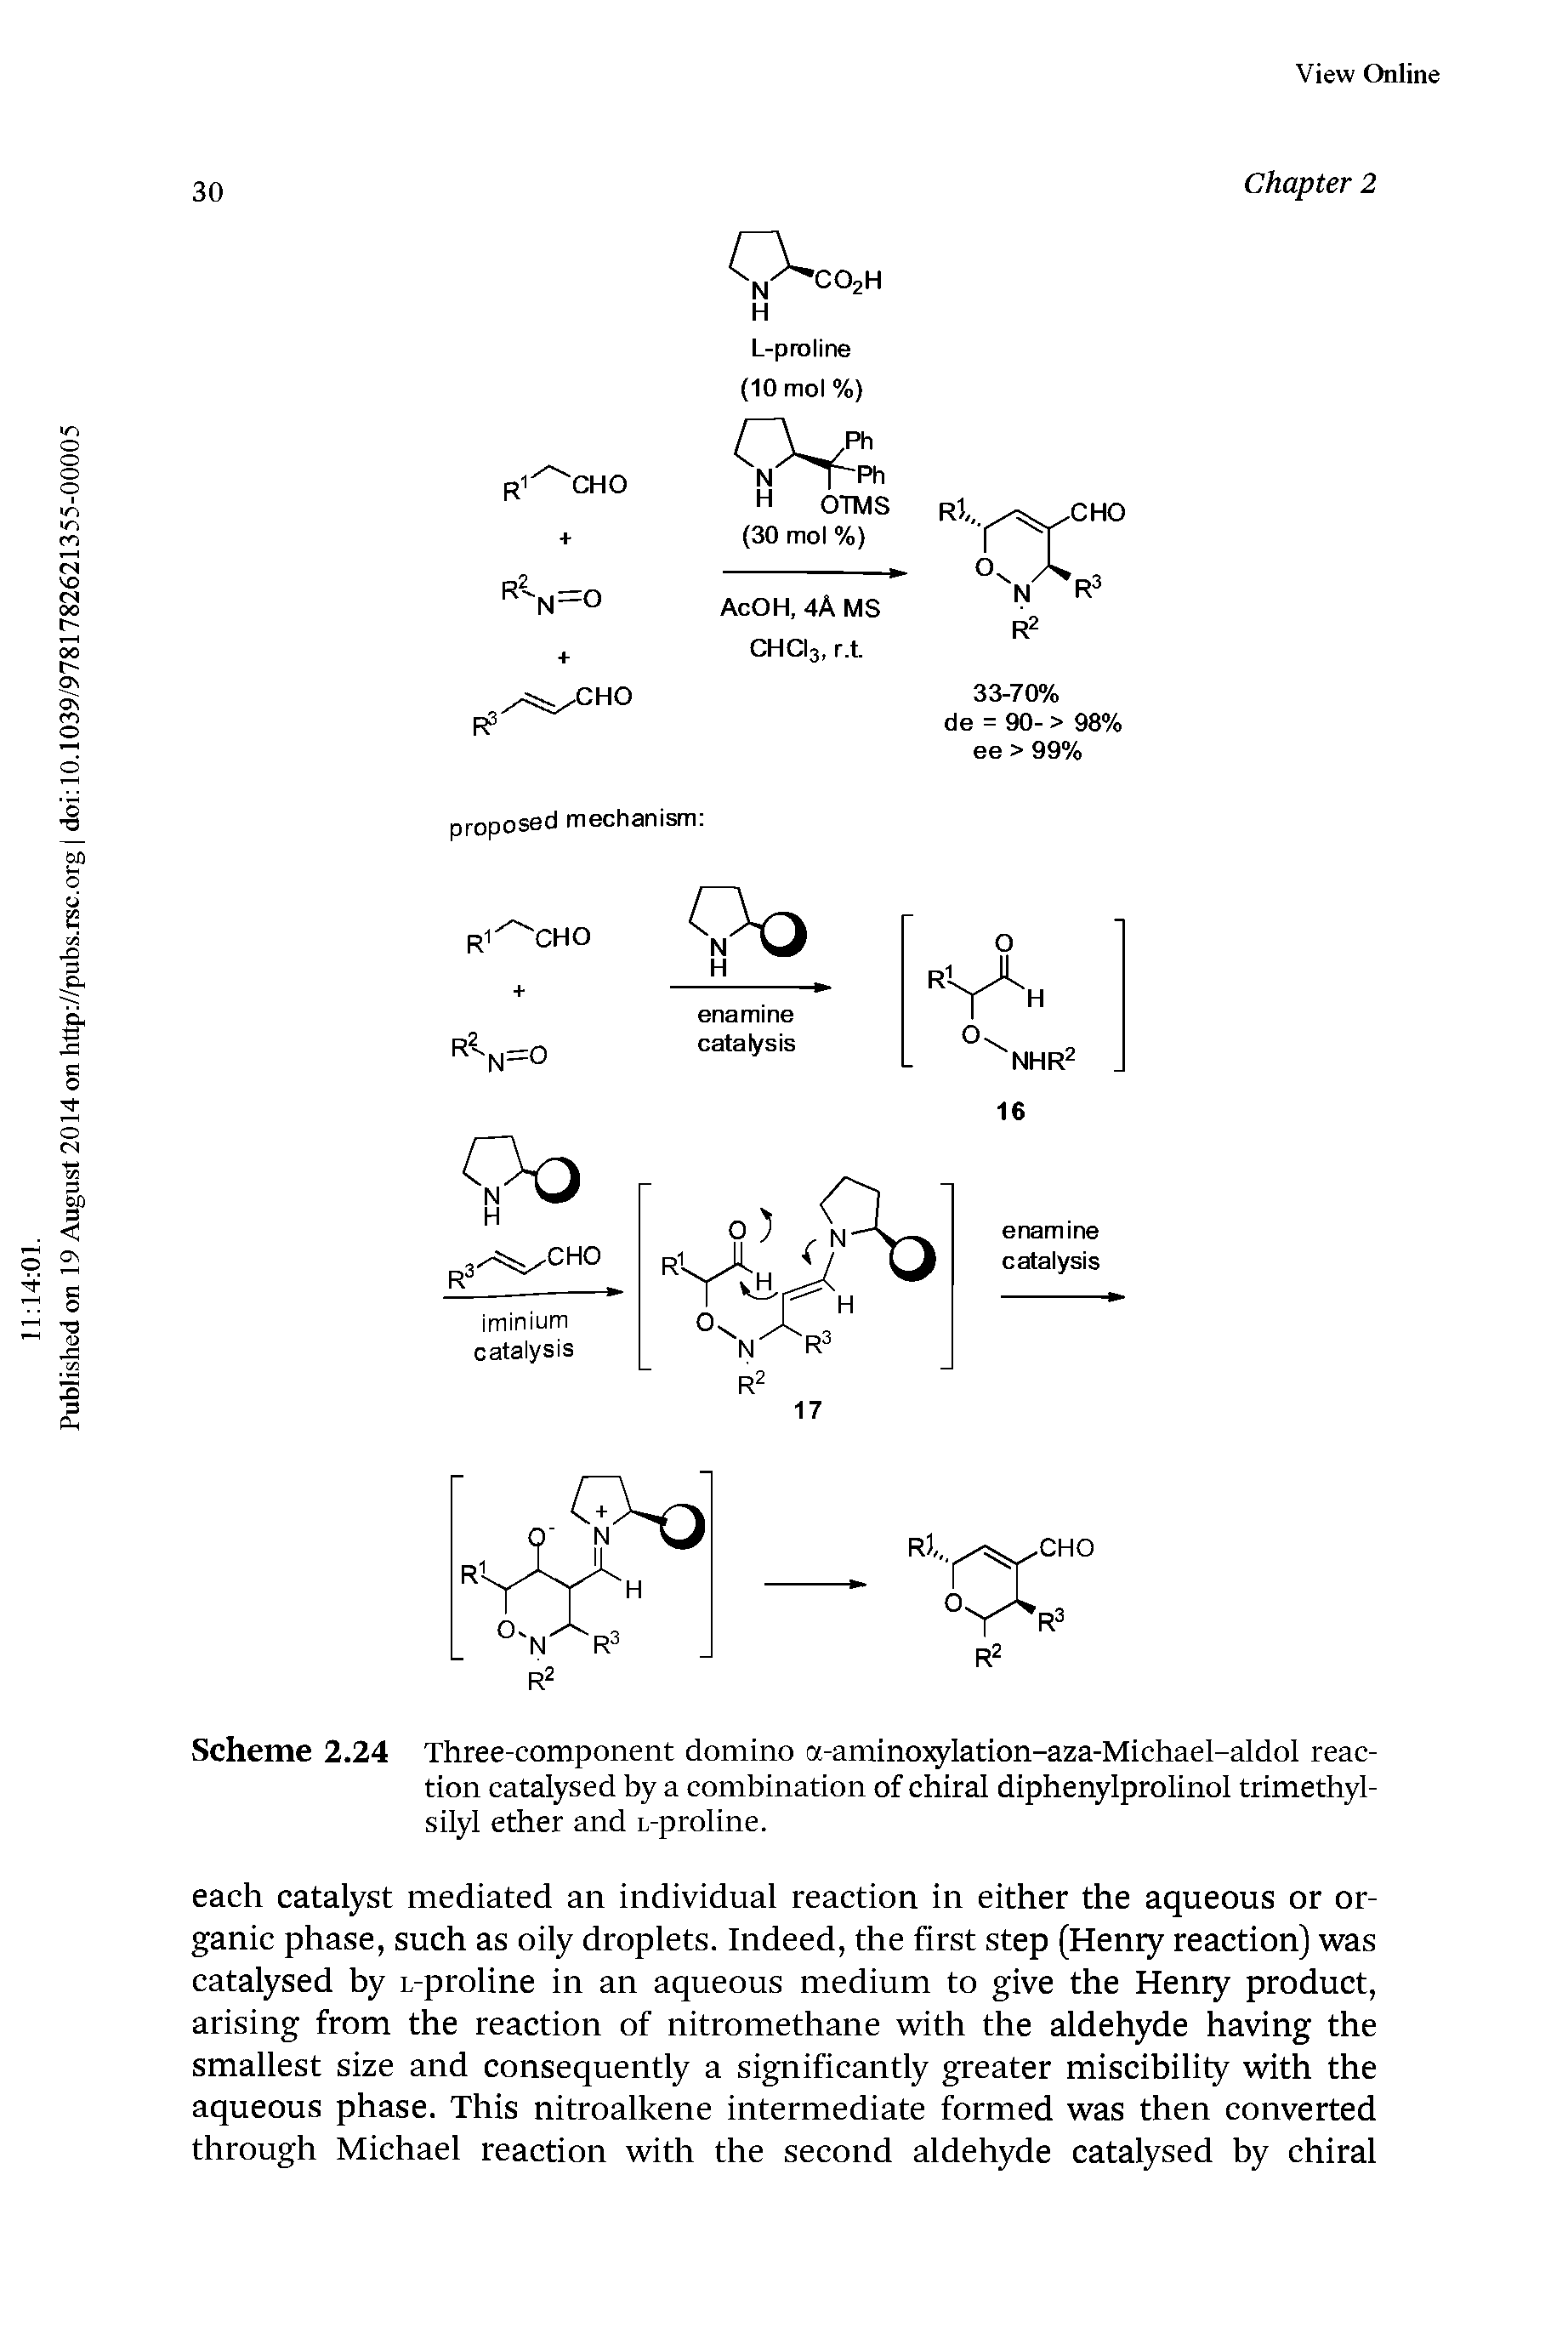 Scheme 2.24 Three-component domino a-aminoiylation-aza-Michael-aldol reaction catalysed by a combination of chiral diphenylprolinol trimethyl-silyl ether and L-proline.